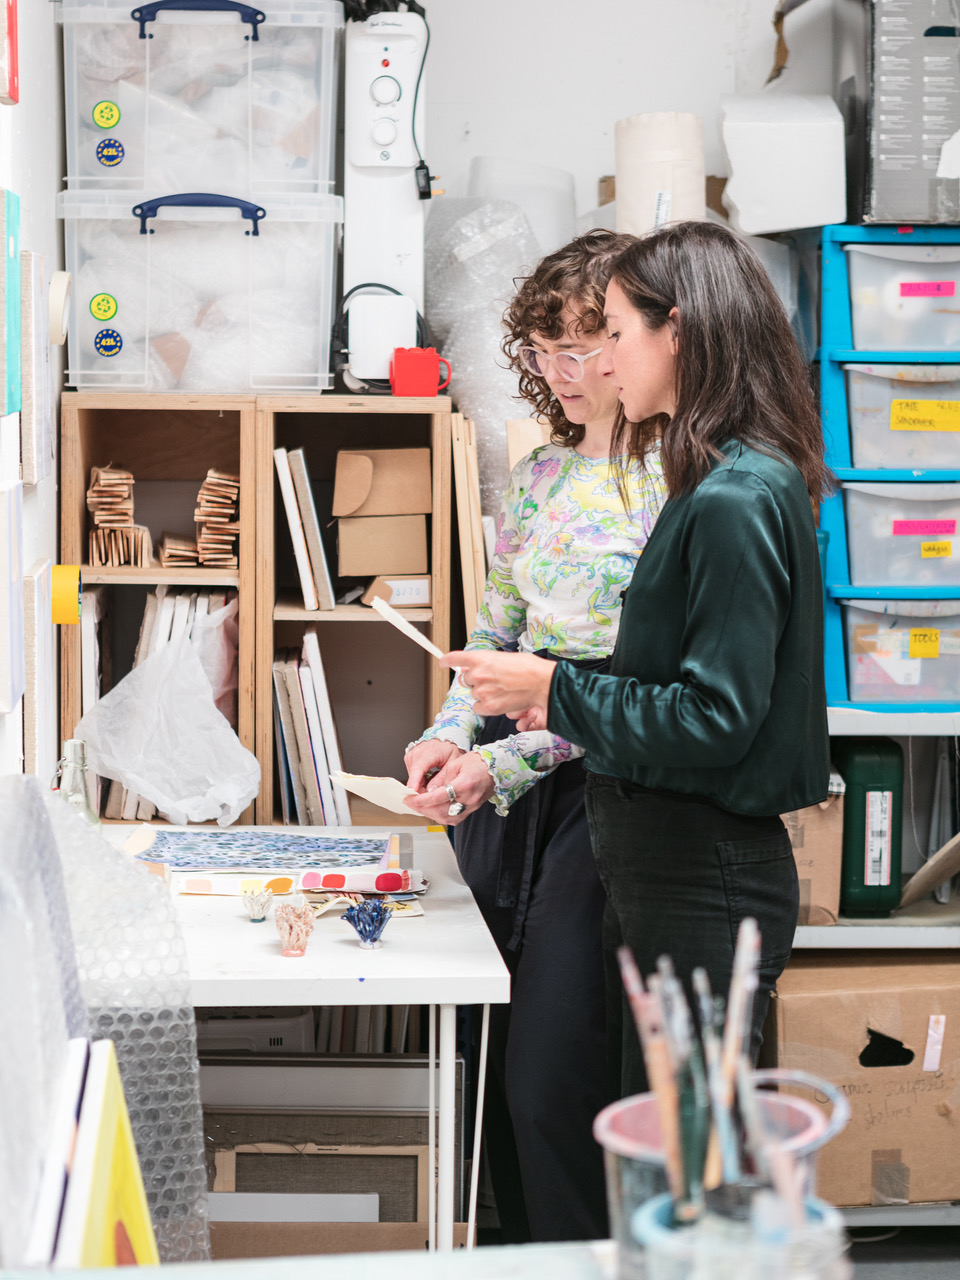 Louise Chignac and artist Ellie MacGarry at her London studio, 2021 © Ollie Hammick / Canopy Collections